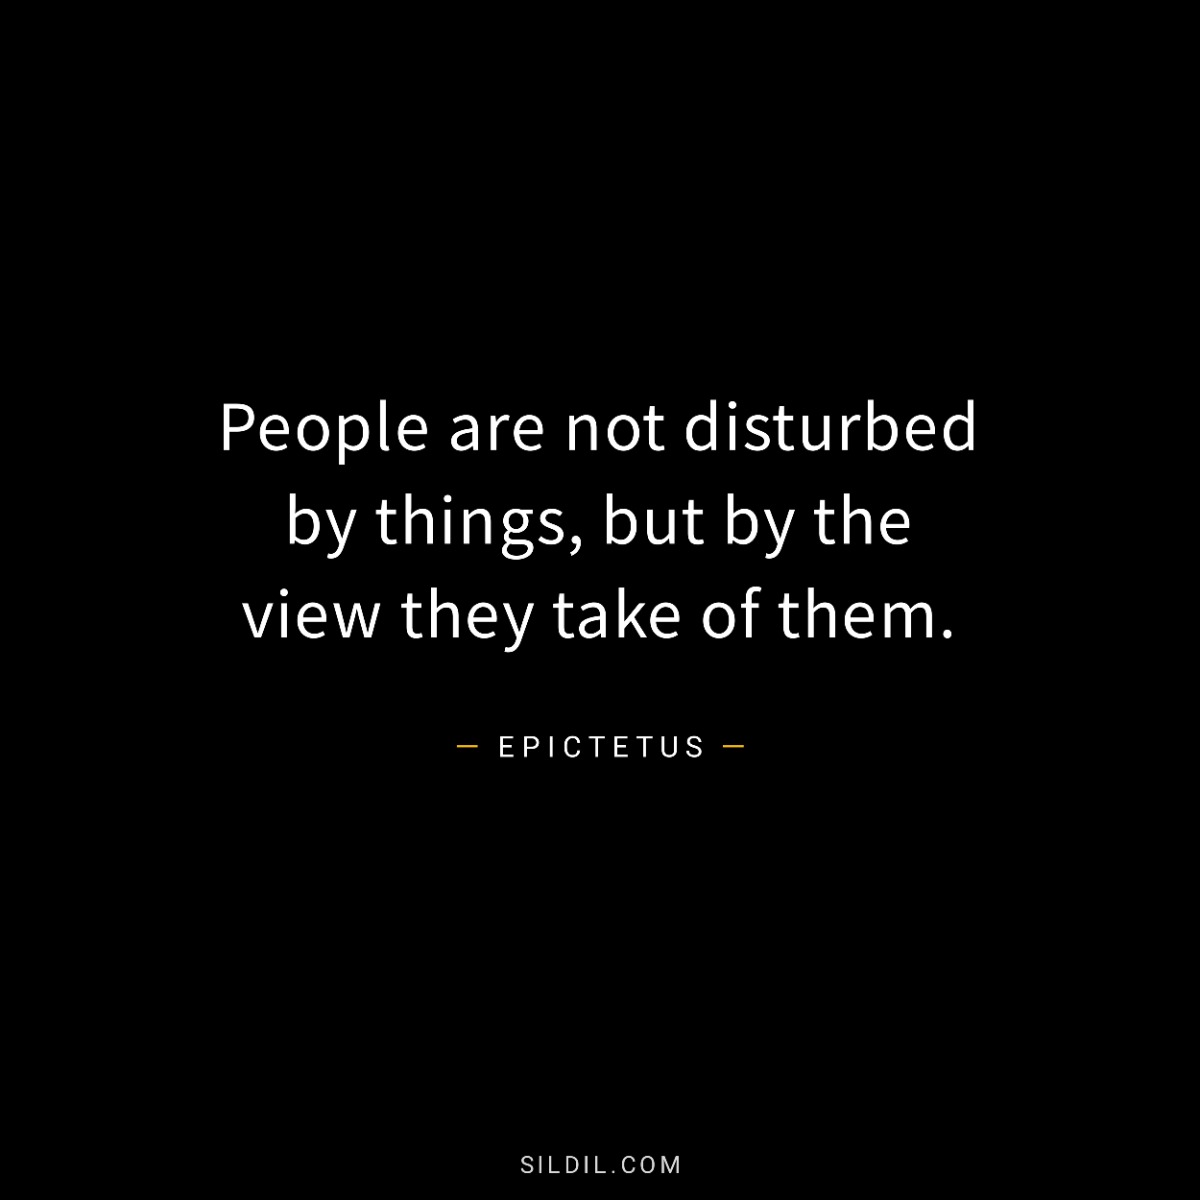 People are not disturbed by things, but by the view they take of them.